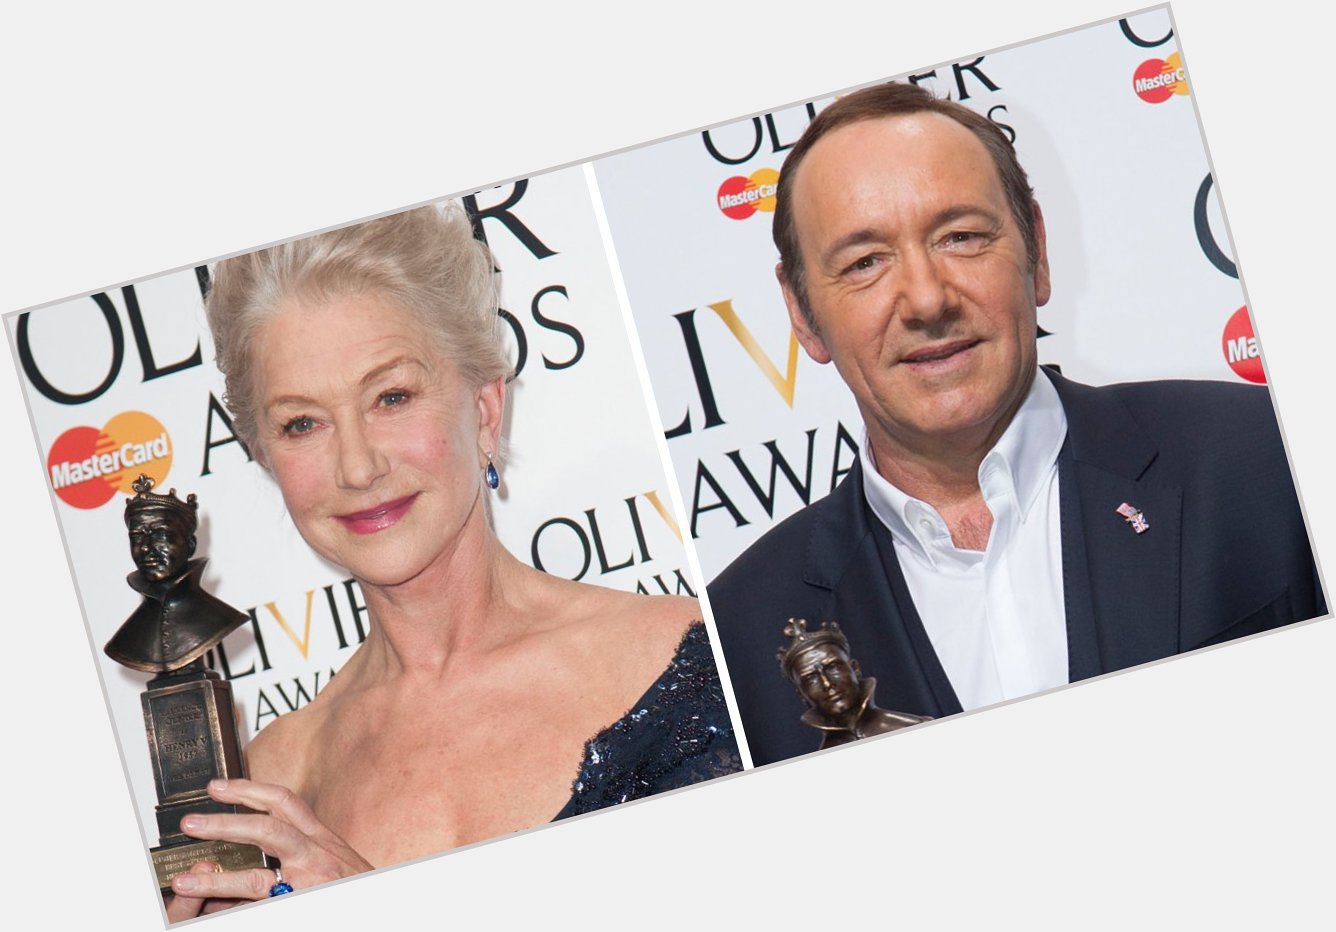 Happy birthday to Helen Mirren and Kevin Spacey. What would you cast them in together? 